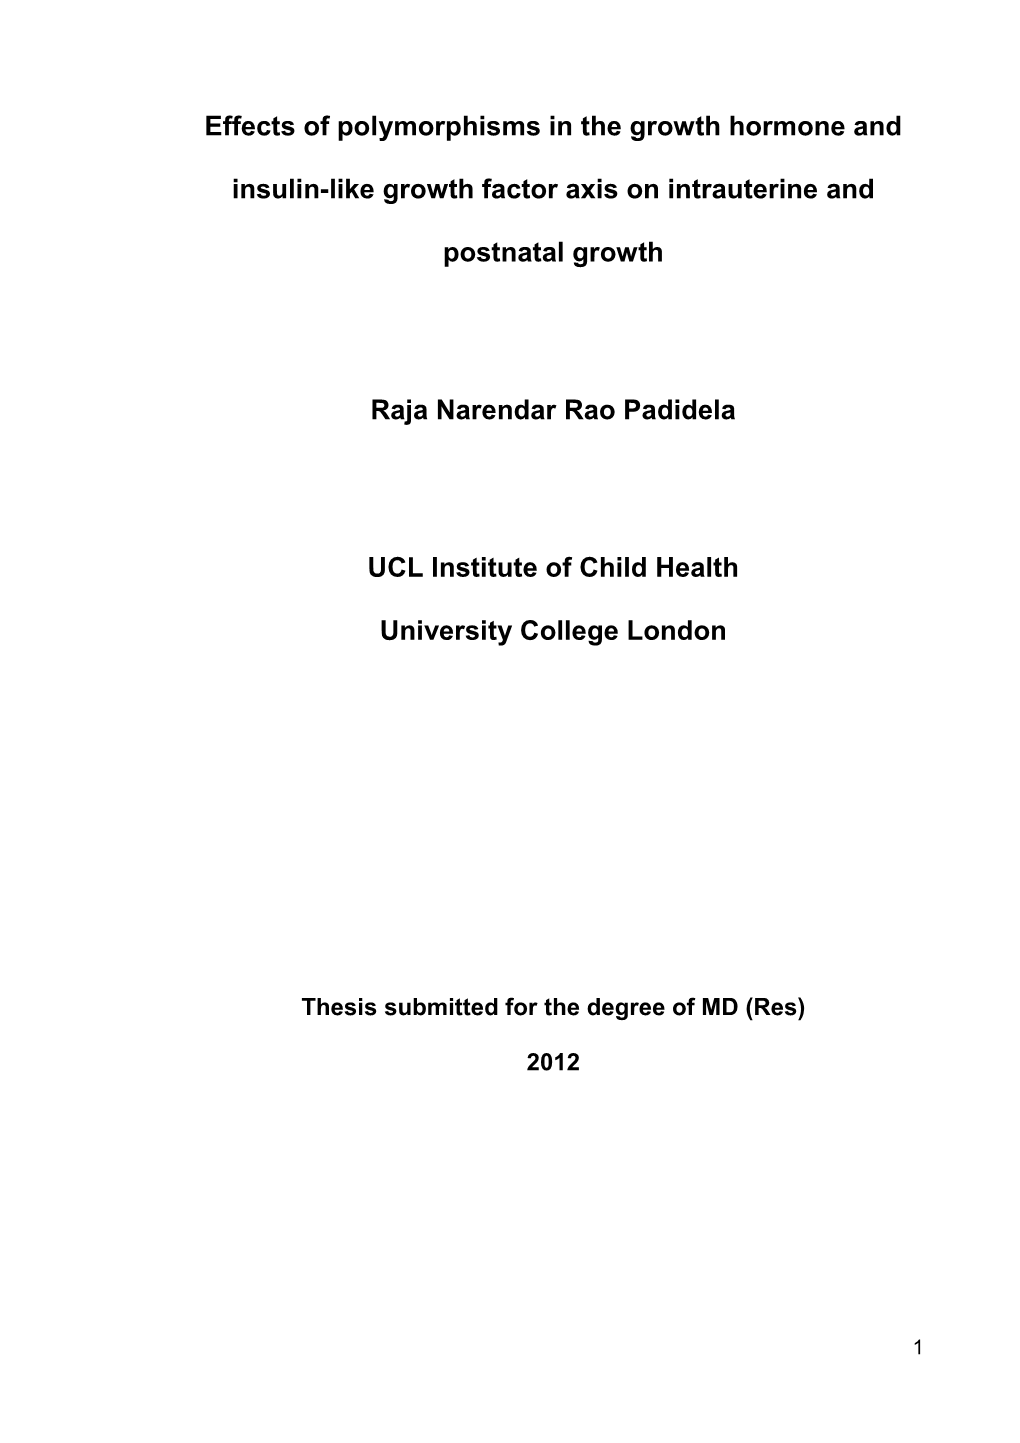 Effects of Polymorphisms in the Growth Hormone and Insulin-Like Growth